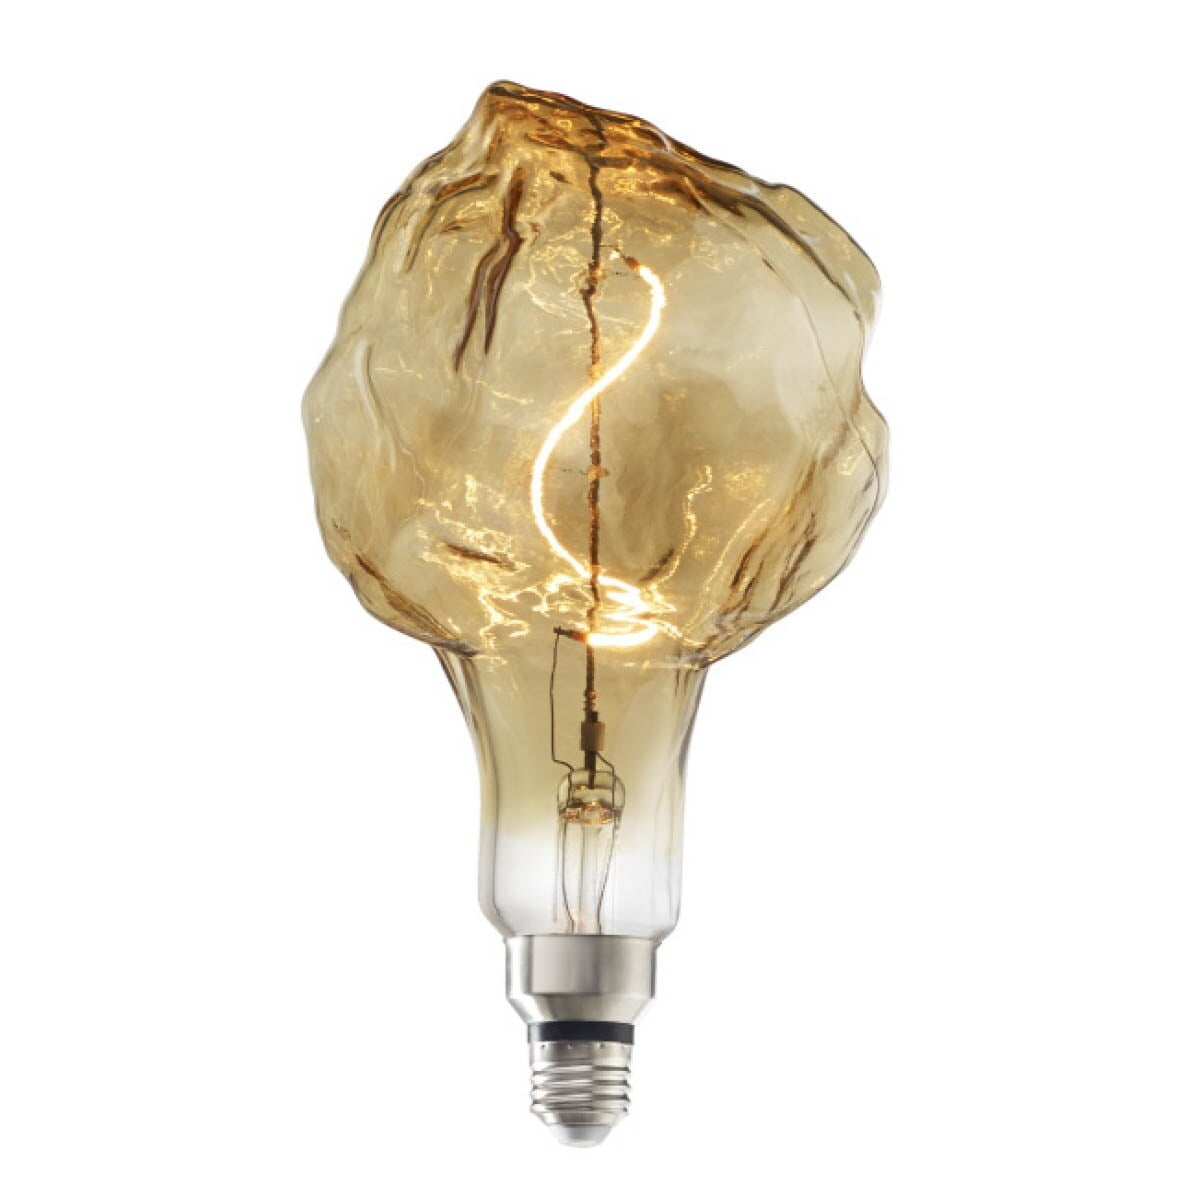 Picture of Bulbrite Grand Naturals Collection 4 Watt Dimmable Glacier Shape Oversized Decorative LED Light Bulb with Medium (E26) Base  2000K Amber Light  200 Lumens  Antique Glass Finish